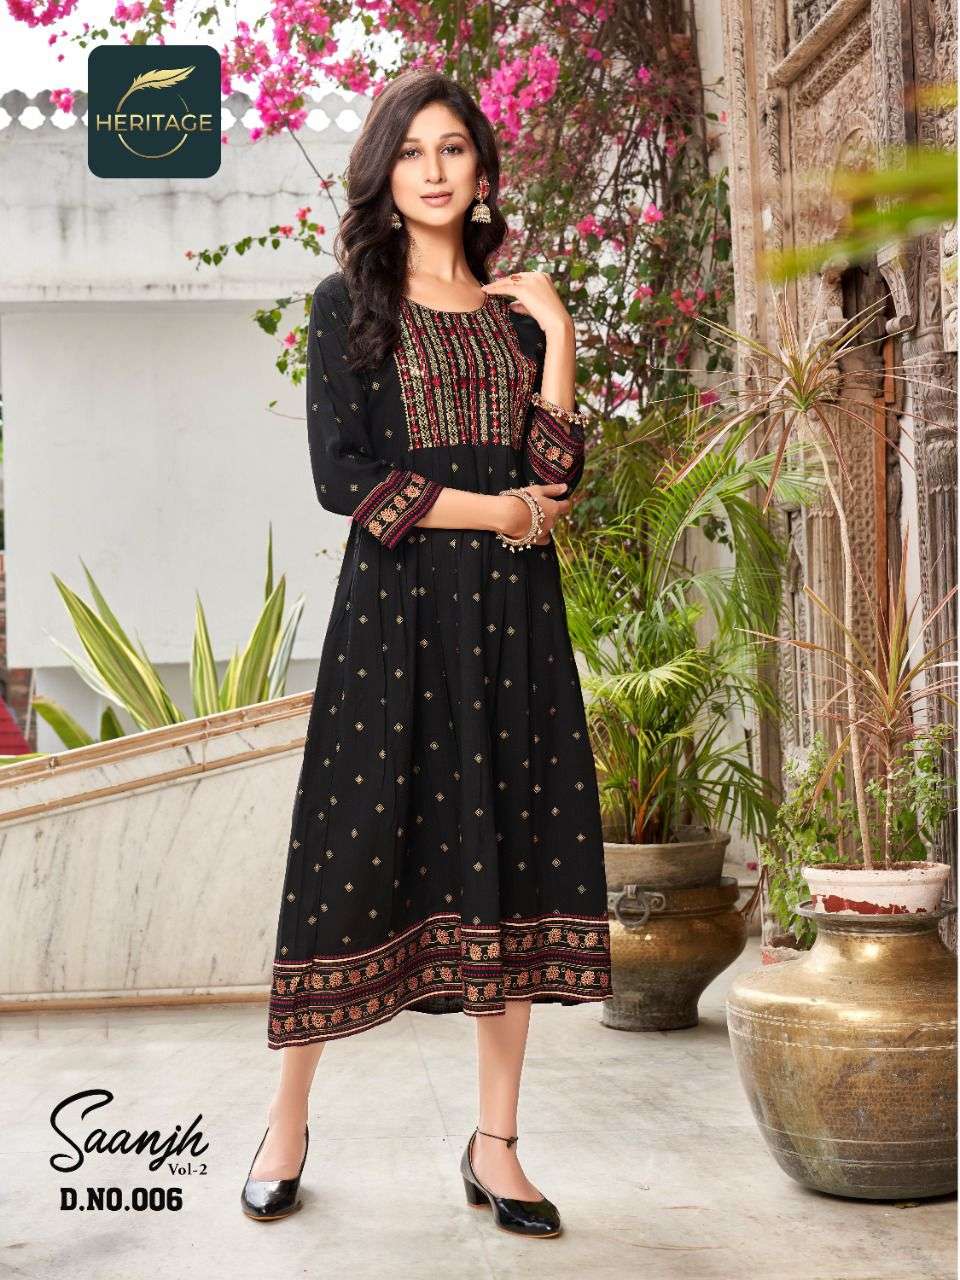 HERITAGE COLLECTION PRESENTS   SAANJH VOL-2